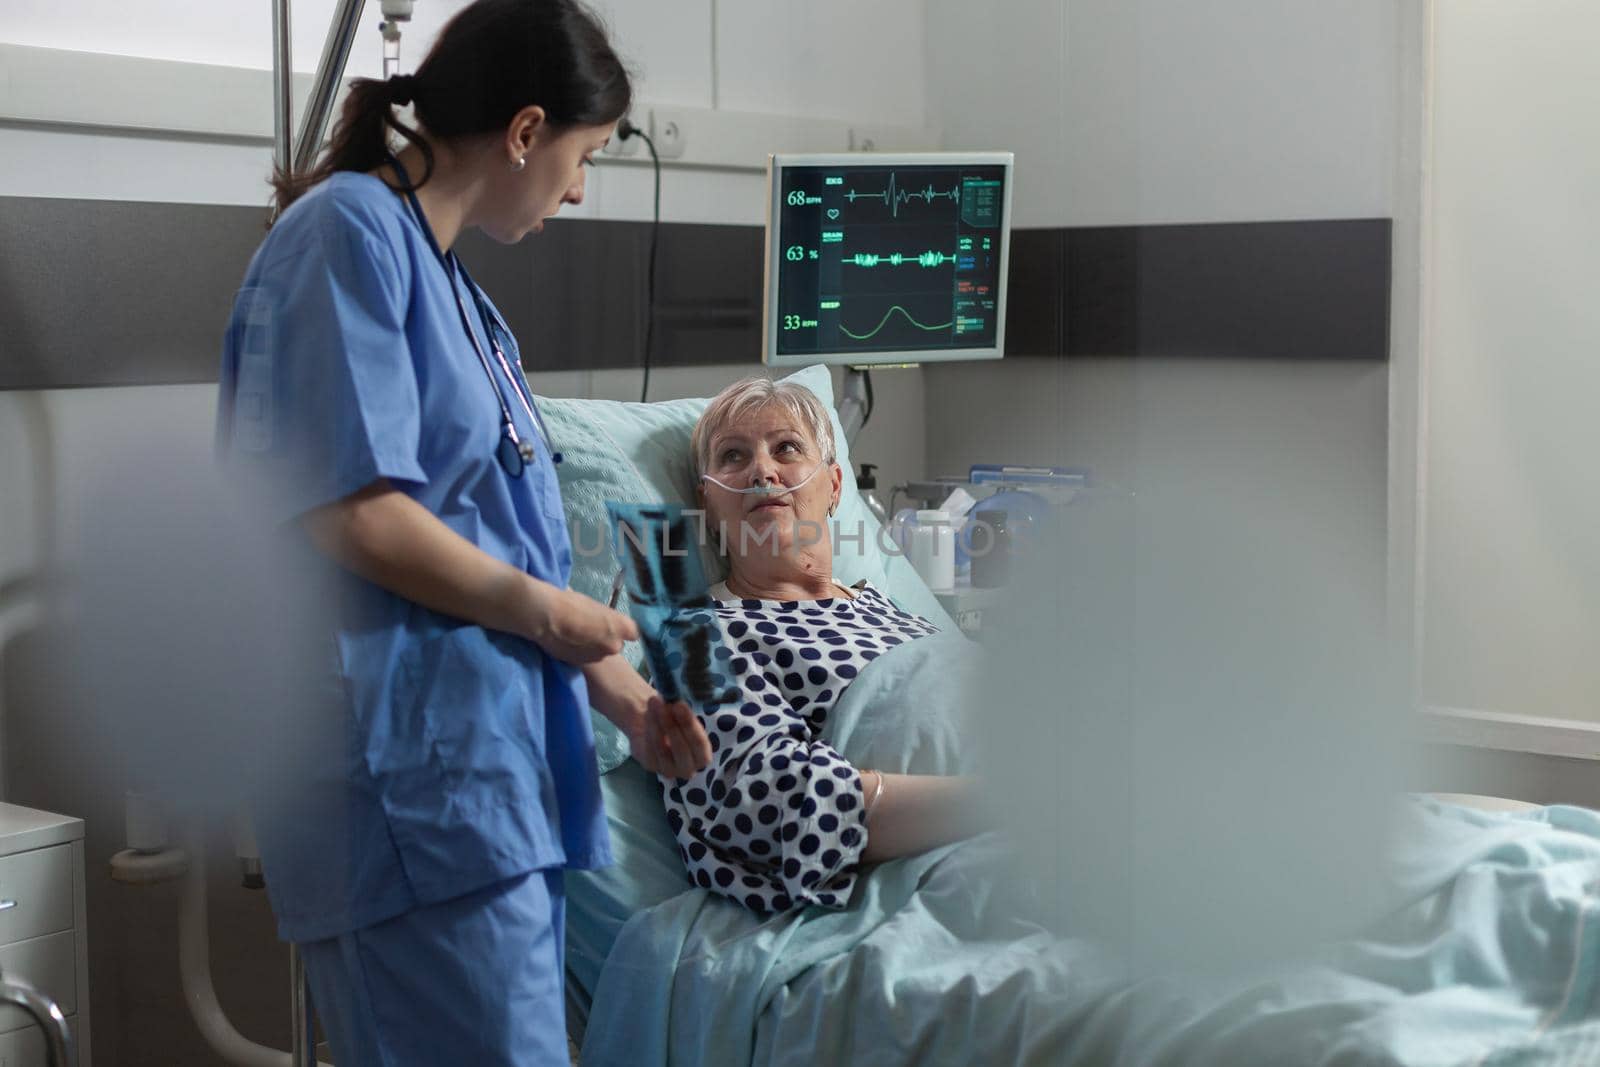 Elderly patient in radiology hospital room laying in bed listening nurse dicussing about chest x-ray radiography for respiratory diagnosis. Breathing with help from oxygen mask.